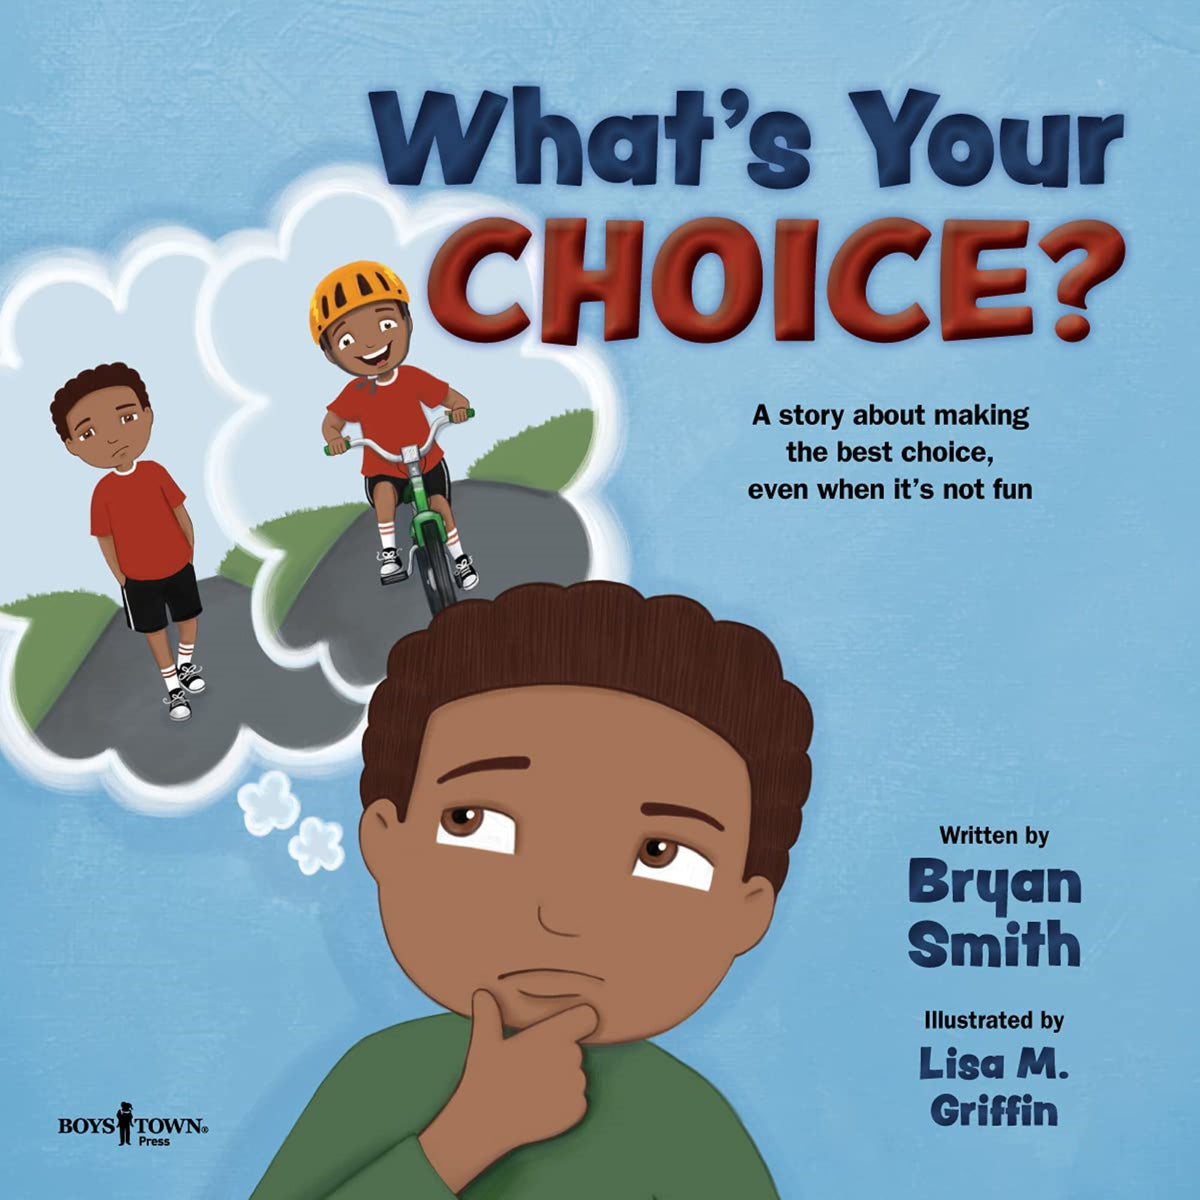 What's Your Choice?: A Story about Making the Best Choice, Even When It's Not Fun?